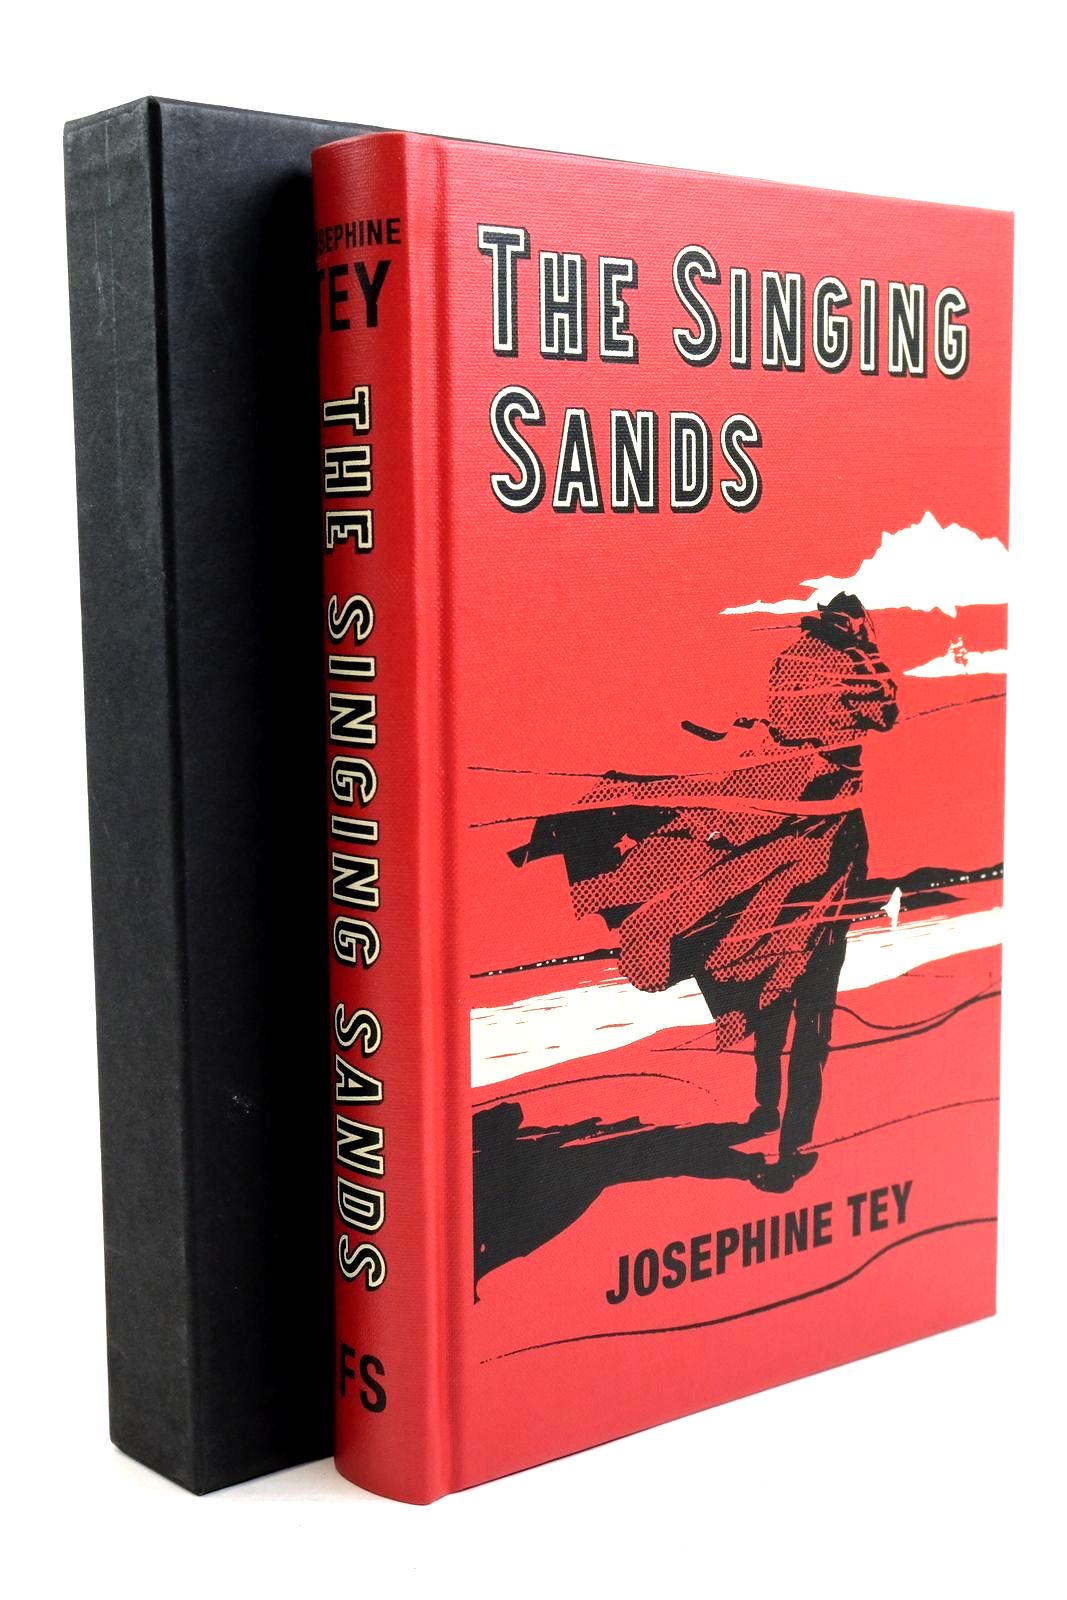 Photo of THE SINGING SANDS written by Tey, Josephine McDermid, Val illustrated by Smith, Mark published by Folio Society (STOCK CODE: 1320760)  for sale by Stella & Rose's Books